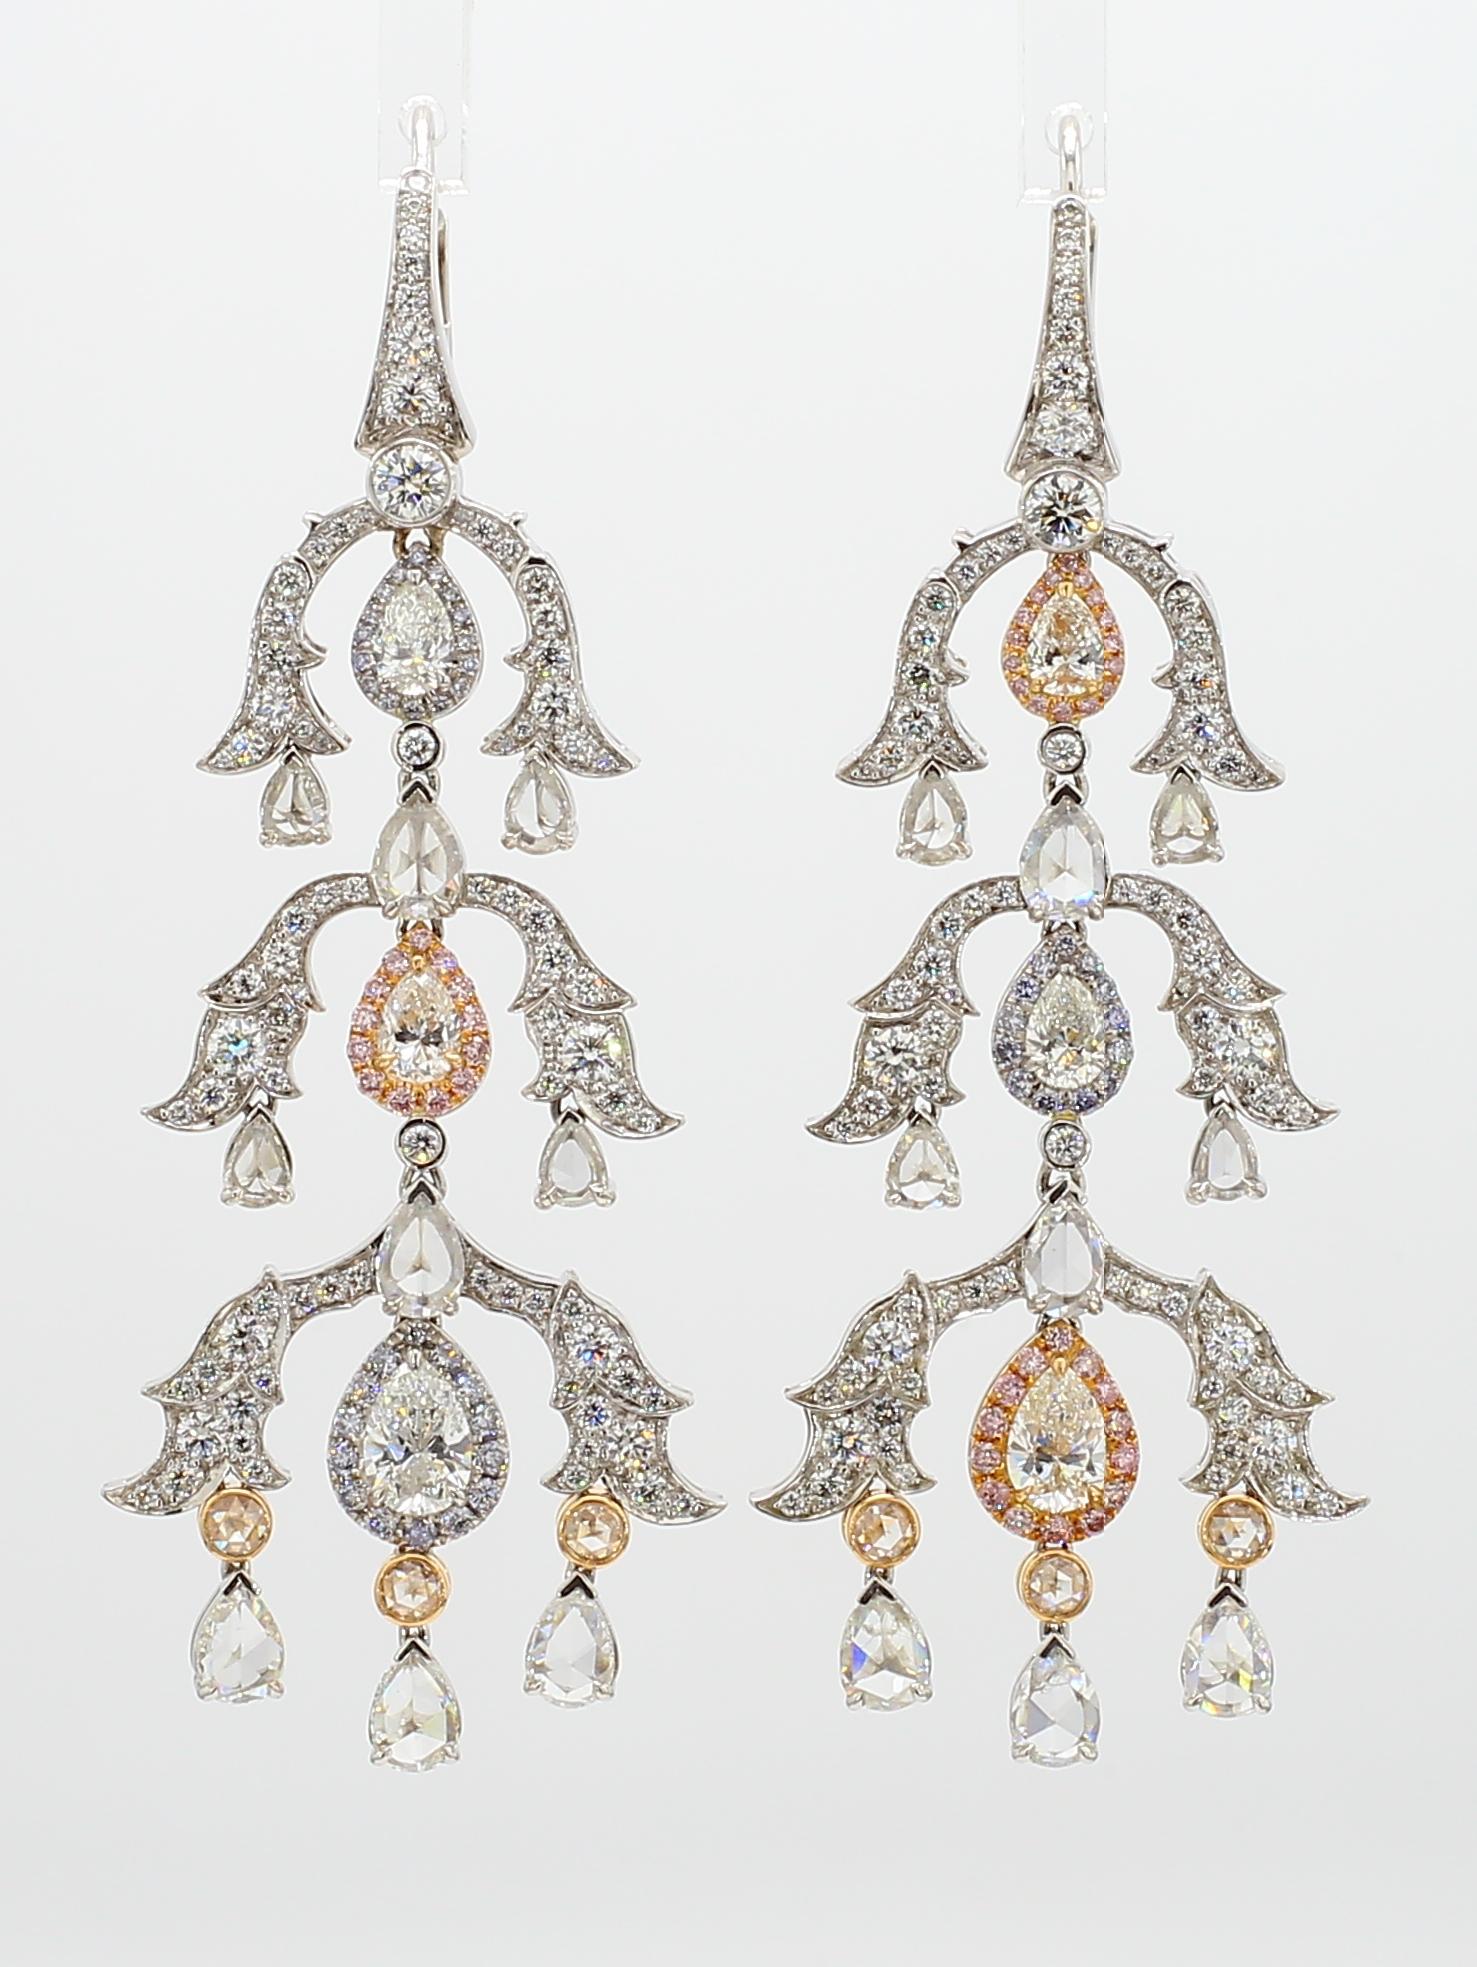 Just Under 7 Ct. White & Pink Diamond 18k Yellow Gold Chandelier Drop Earrings. In New Condition For Sale In New York, NY